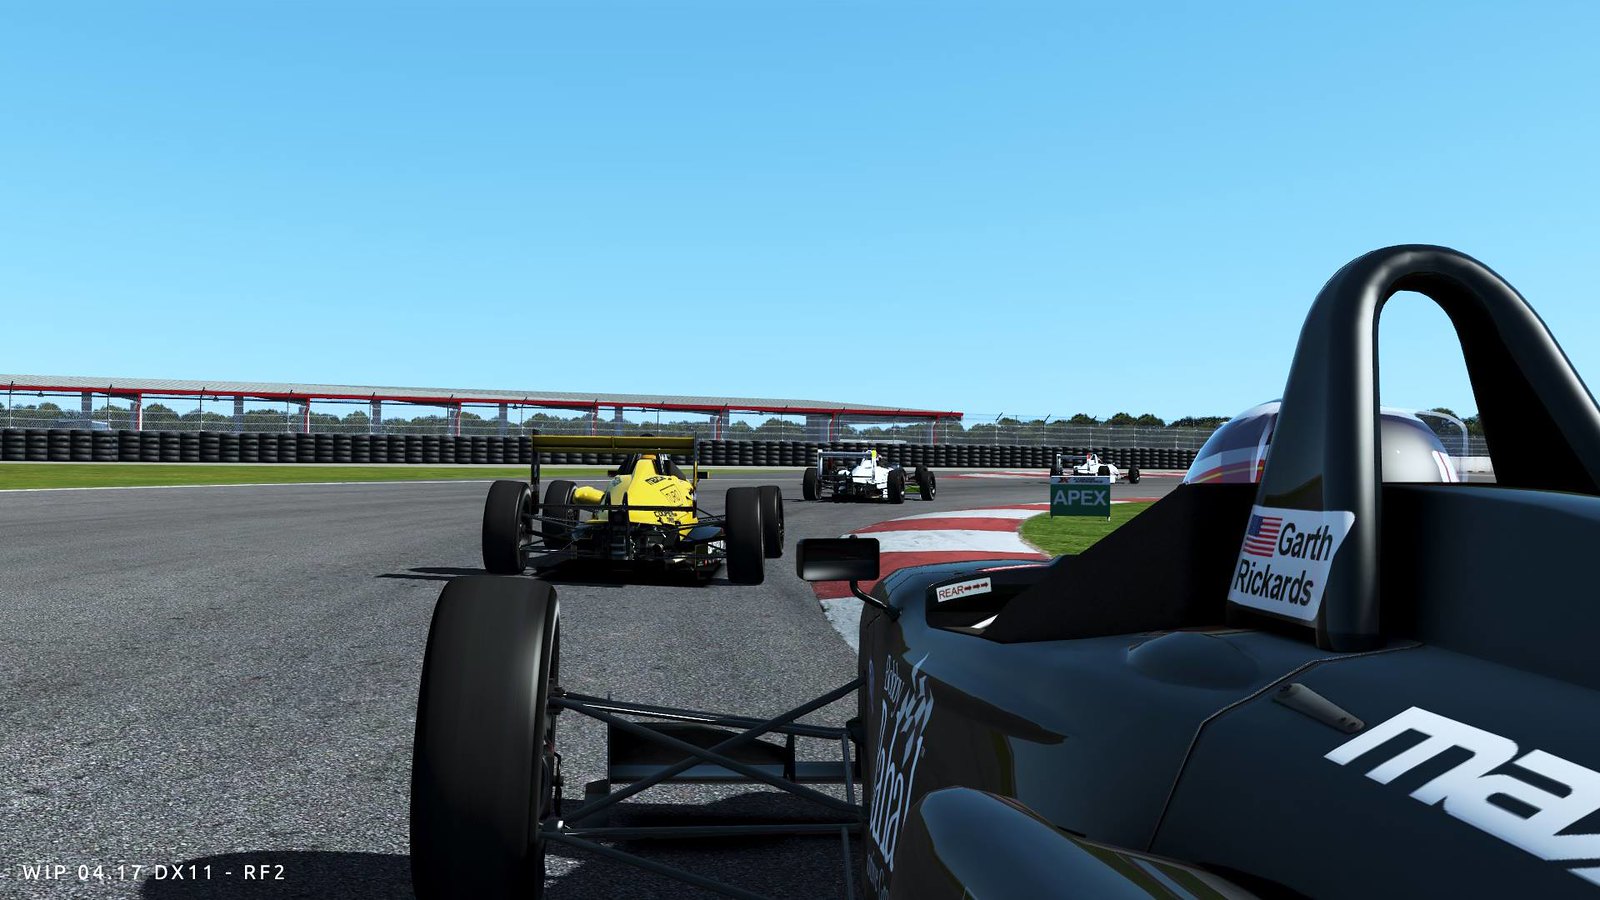 rfactor 2 dx11 track map